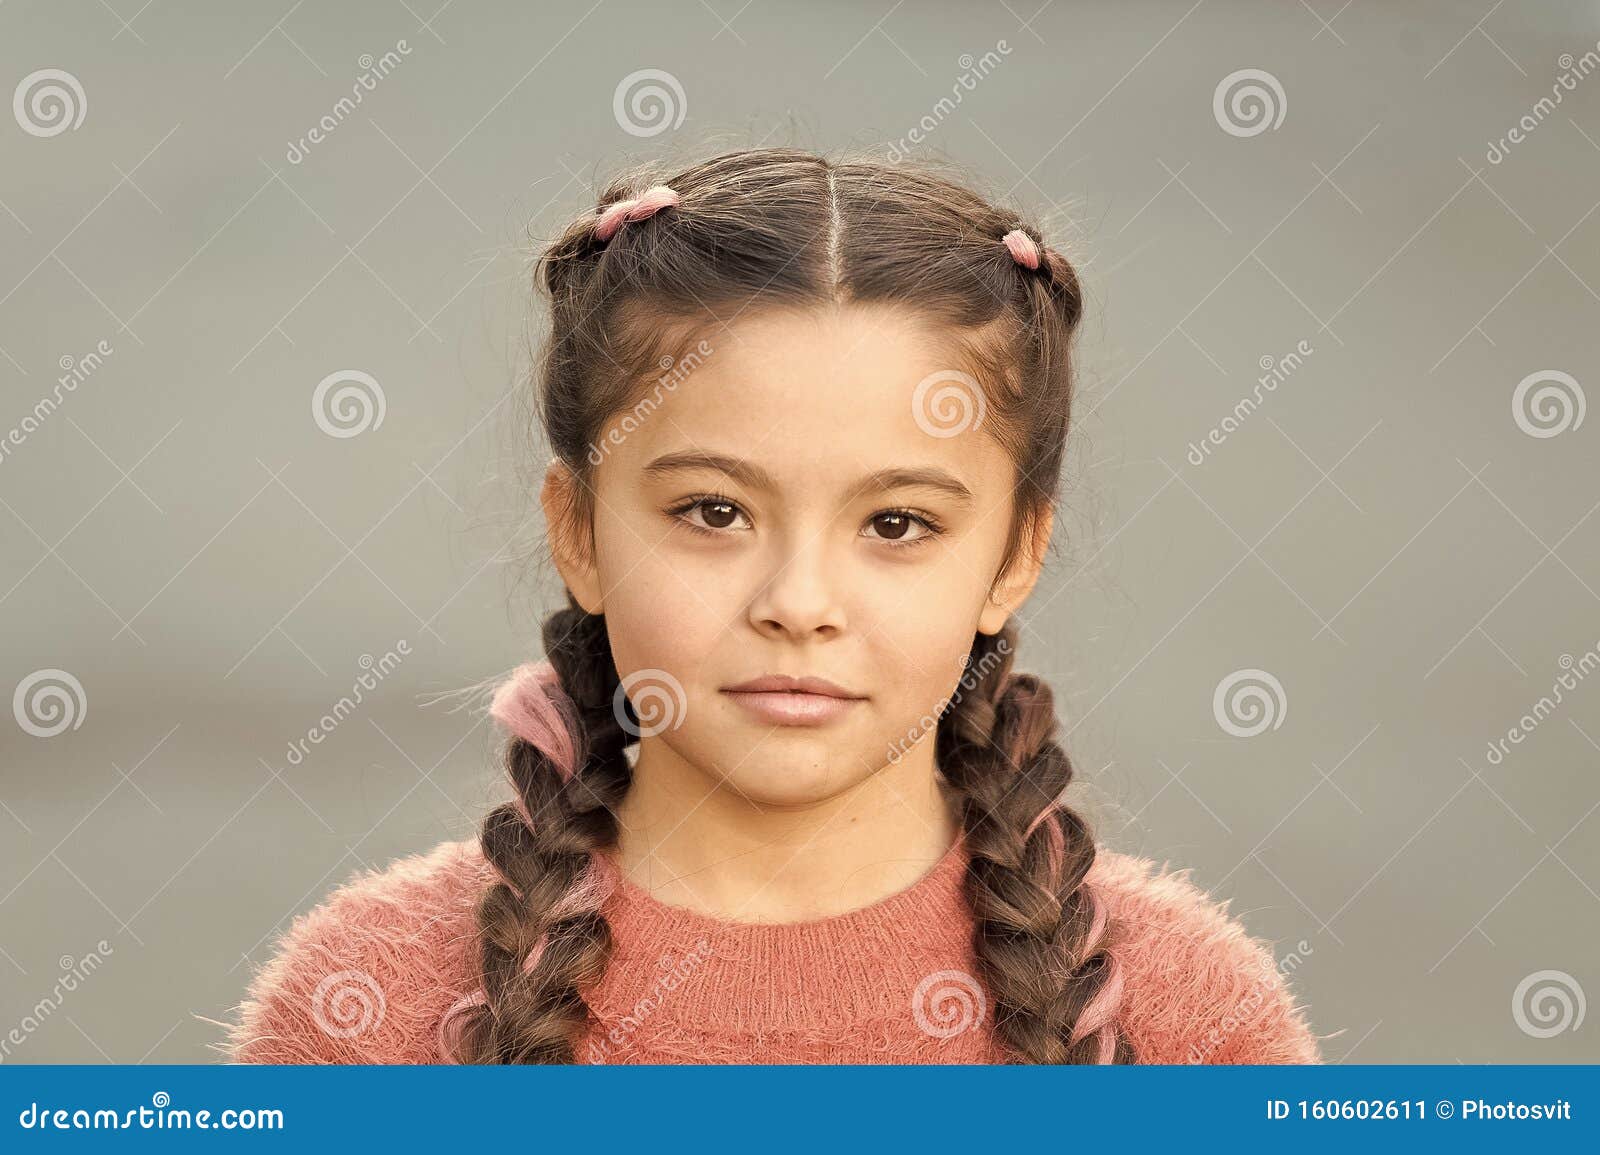 Beautiful Hairstyle. Fashionable Hairstyle for Kids. Small Girl with  Fashionable Braids Hairstyle. Fashion Trend Stock Image - Image of  conditioner, fashion: 160602611